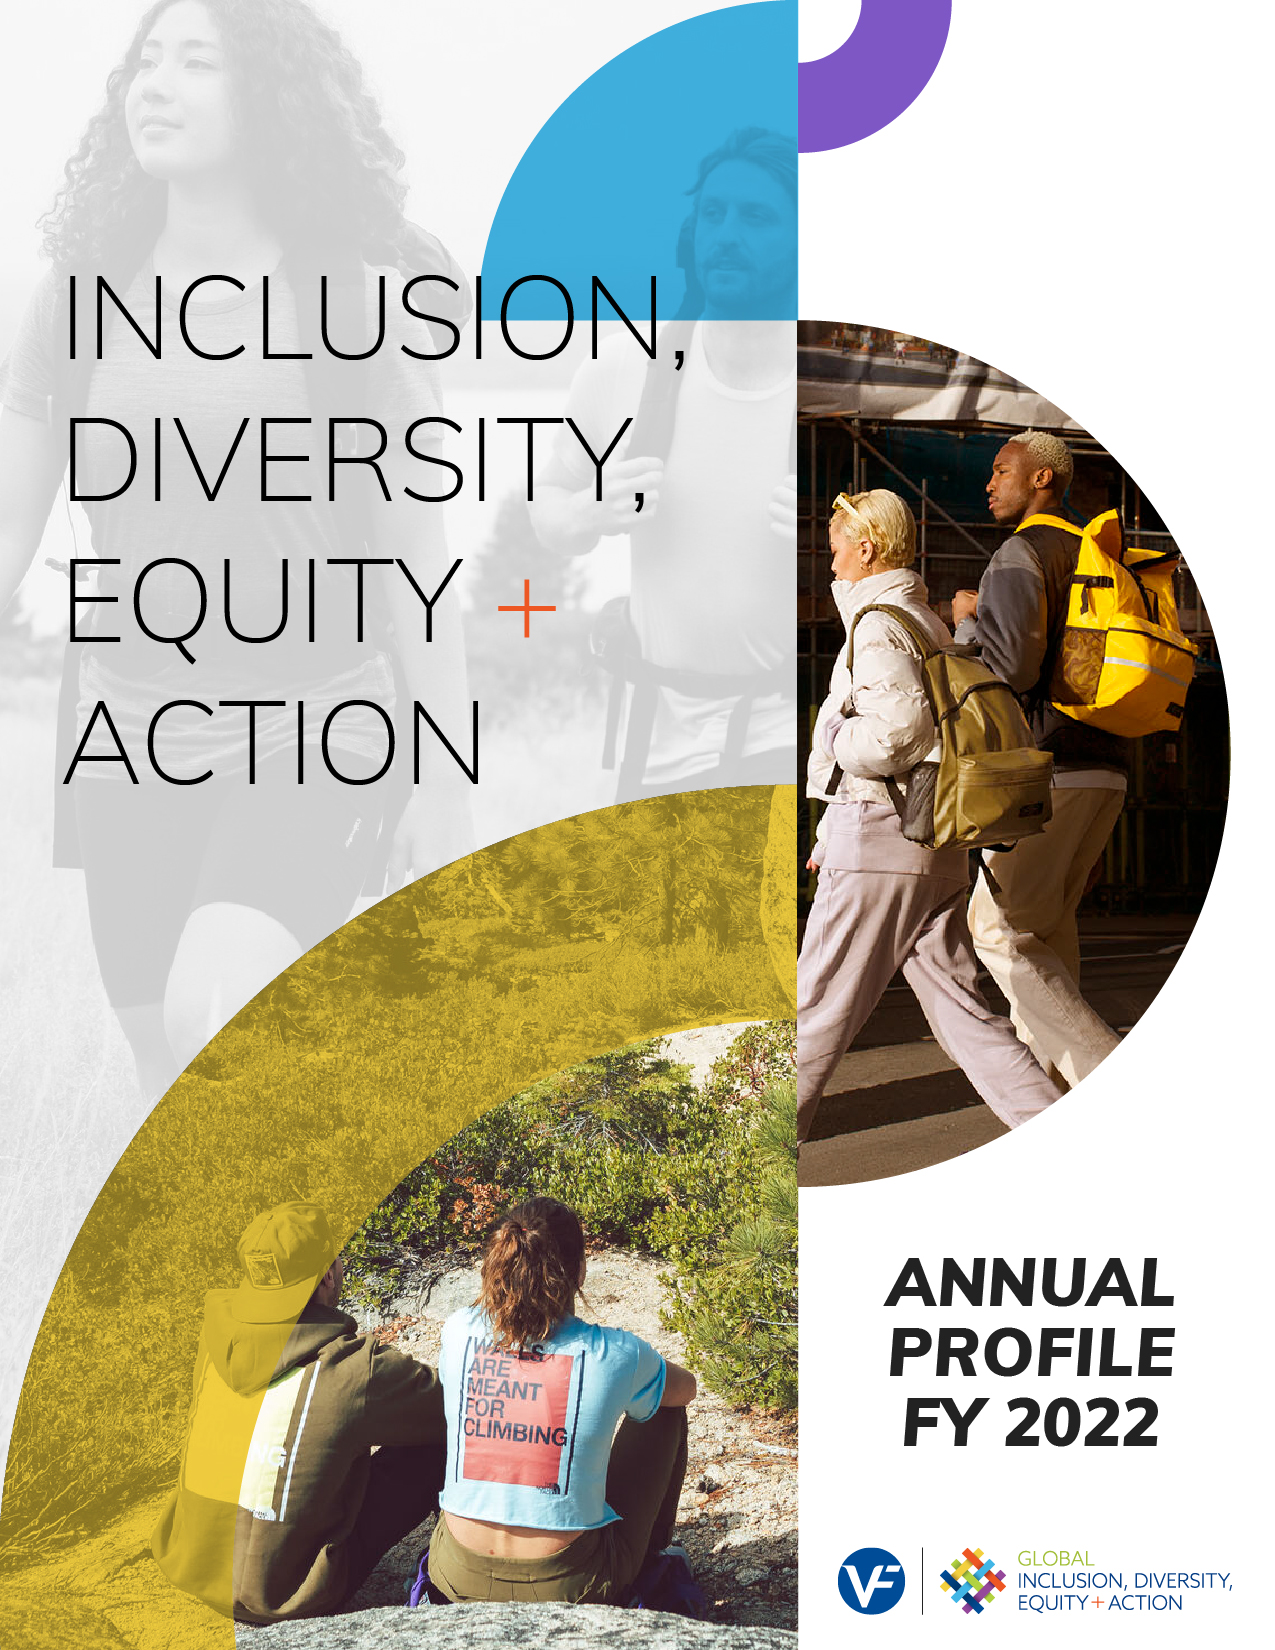 OUR COMMITMENT TO INCLUSION & DIVERSITY